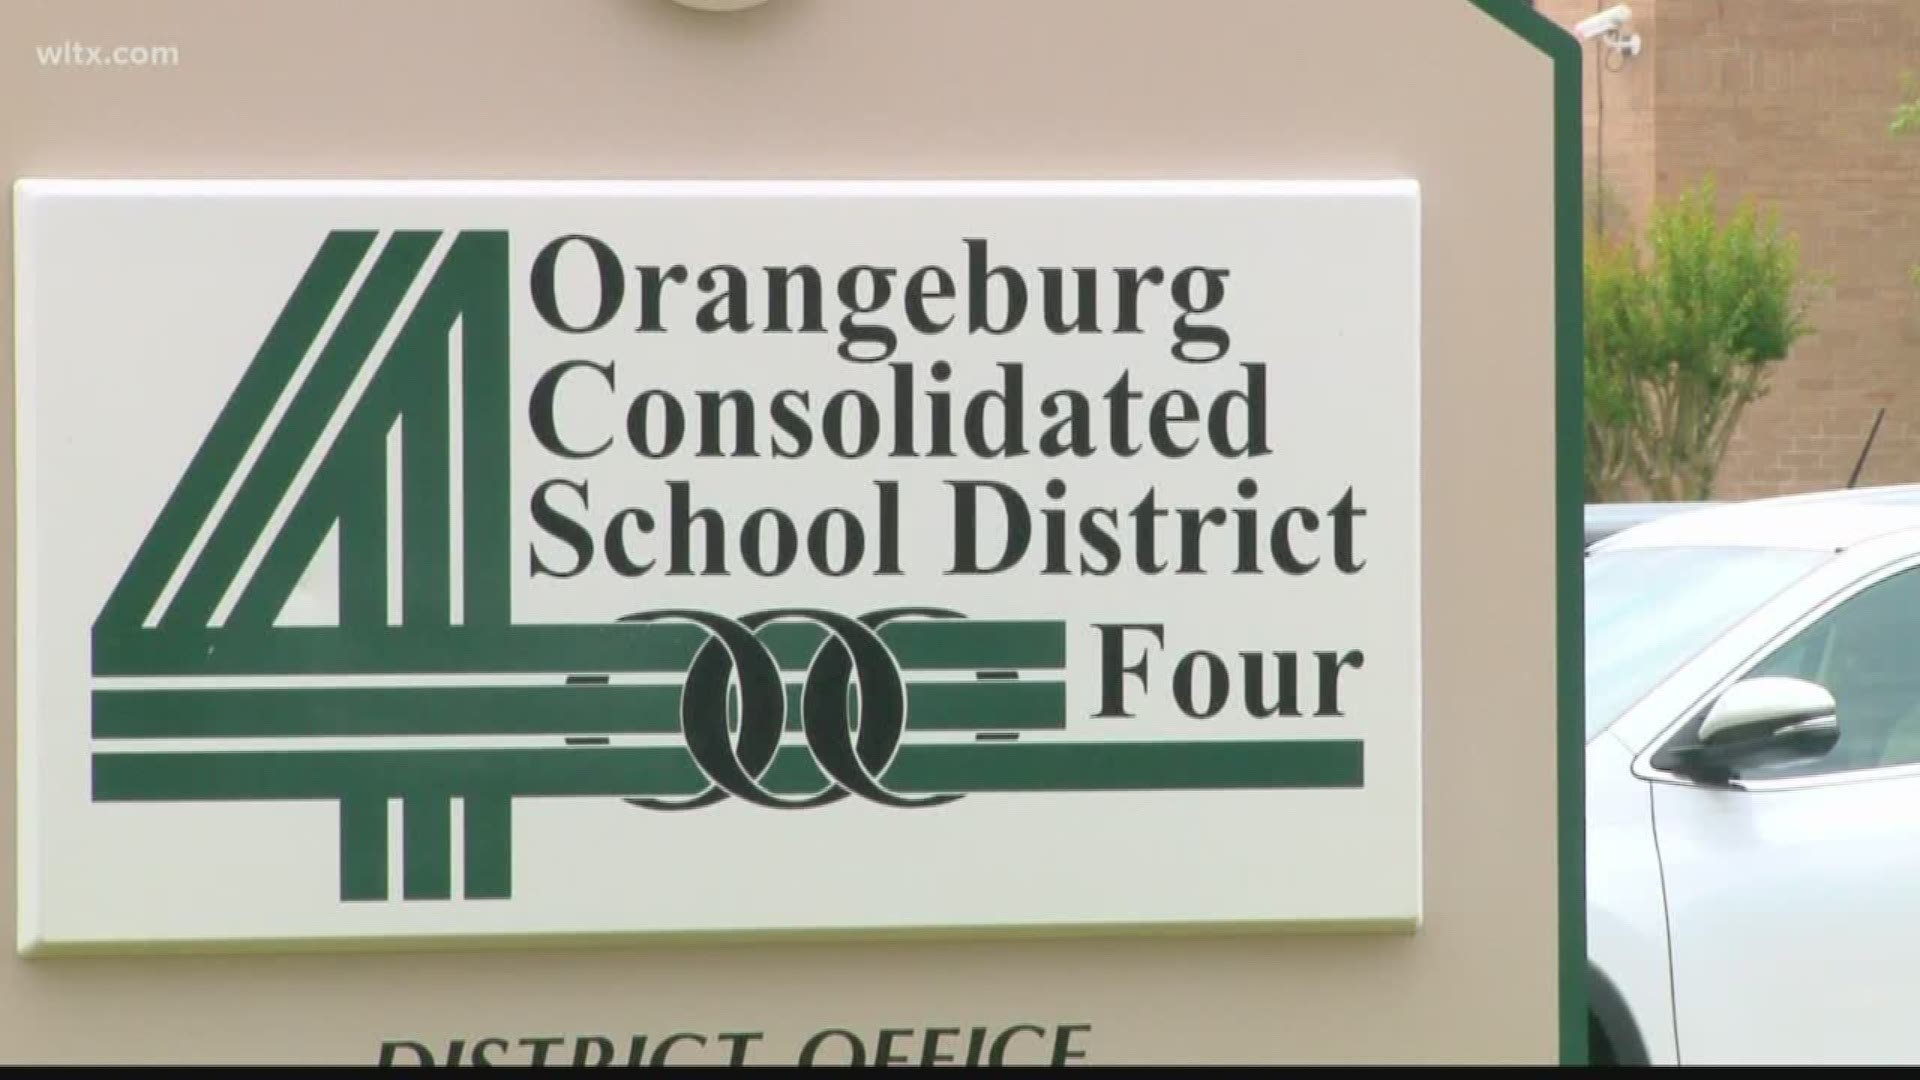 All public schools in Orangeburg County will operate as normal Wednesday during the teacher rally.